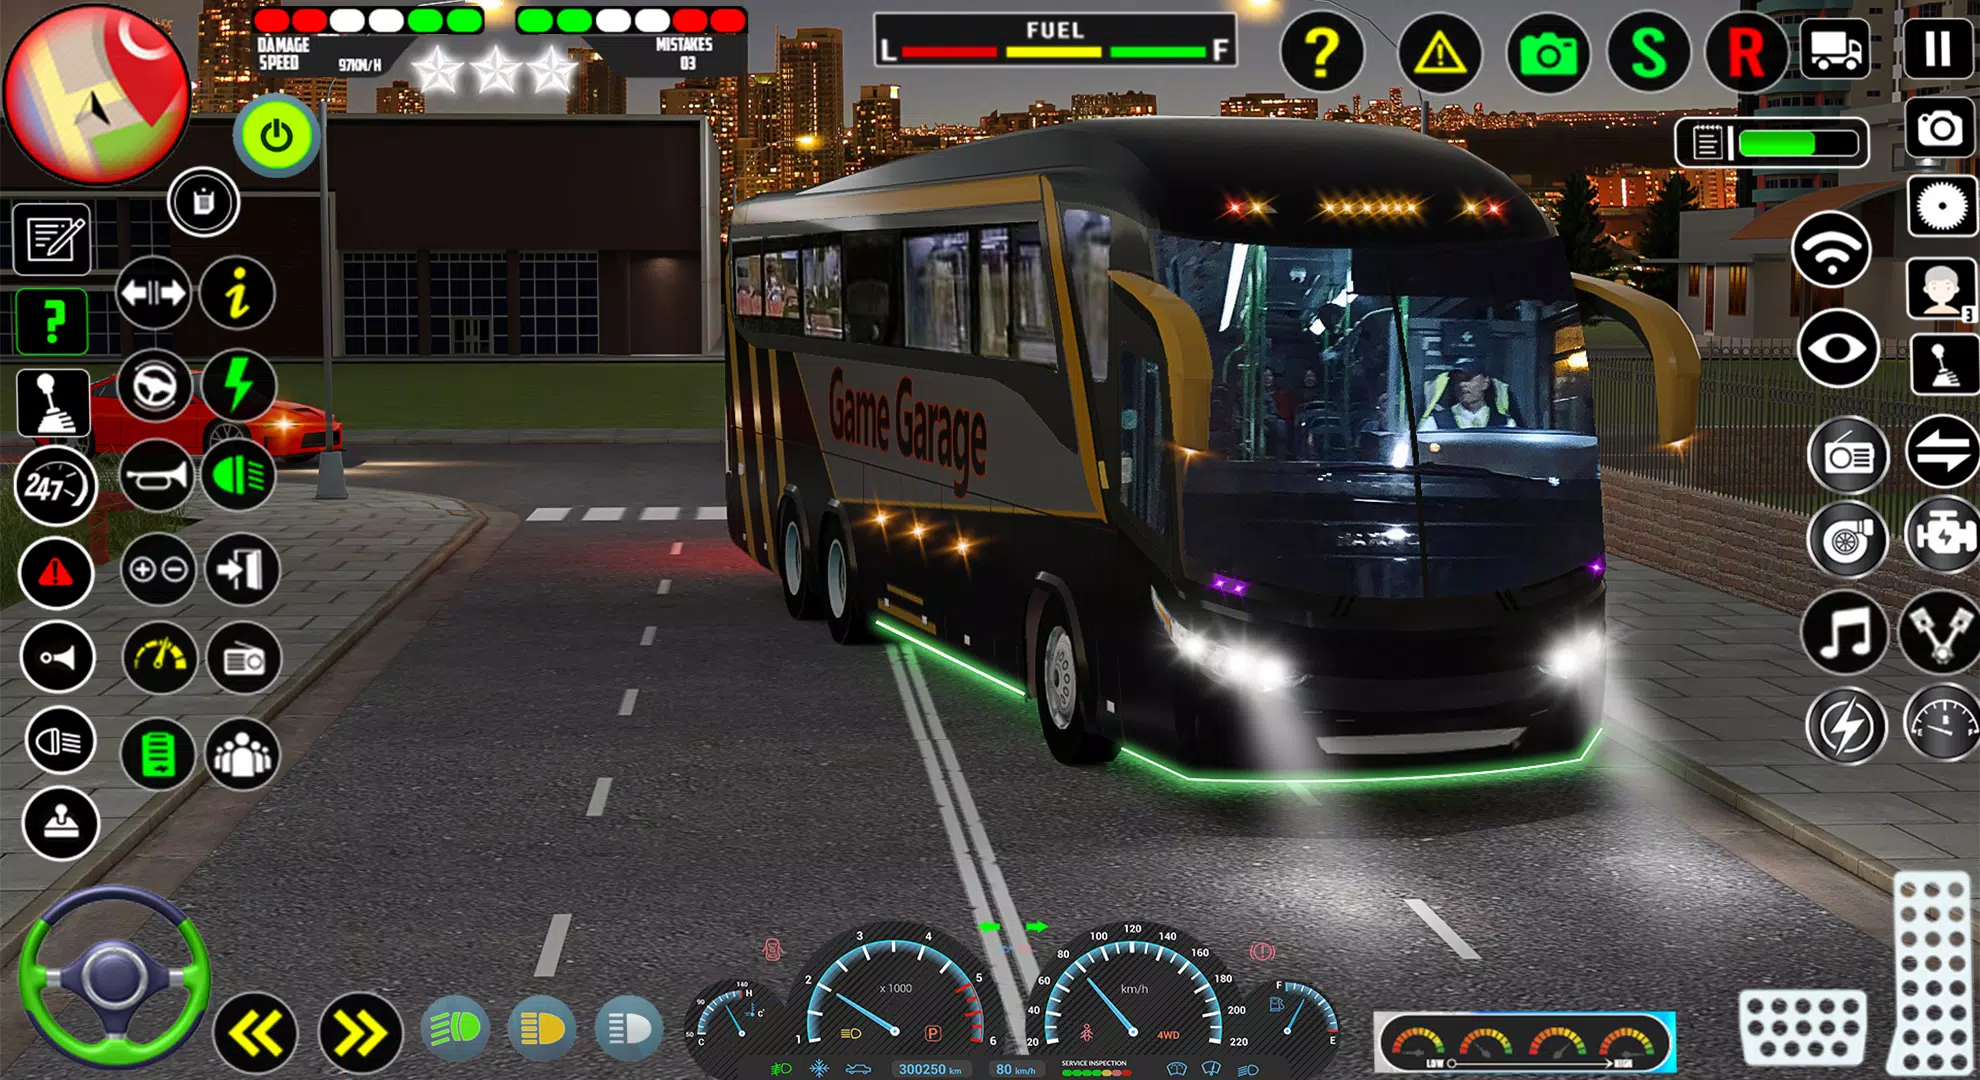 Bus Simulator - Bus Games 3D - Apps on Google Play